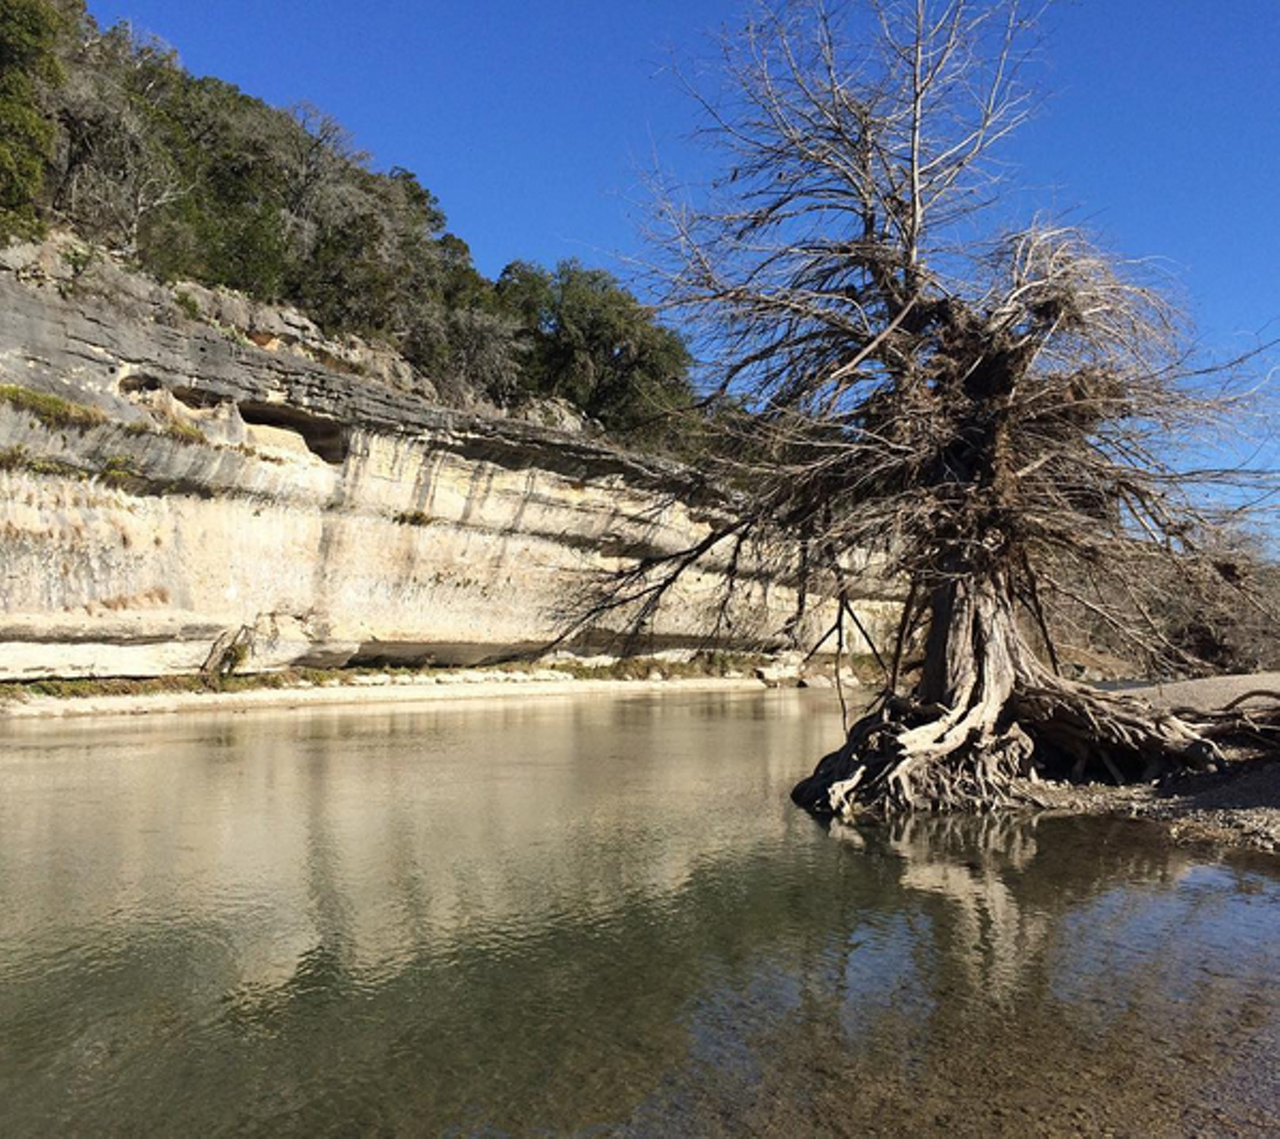 Guadalupe State Park
3350 Park Road 31, Spring BranchWith four miles of river frontage, Guadalupe State Park can satisfy all your swimming, tubing and fishing needs in one stop.
Instagram/bryanrindfuss